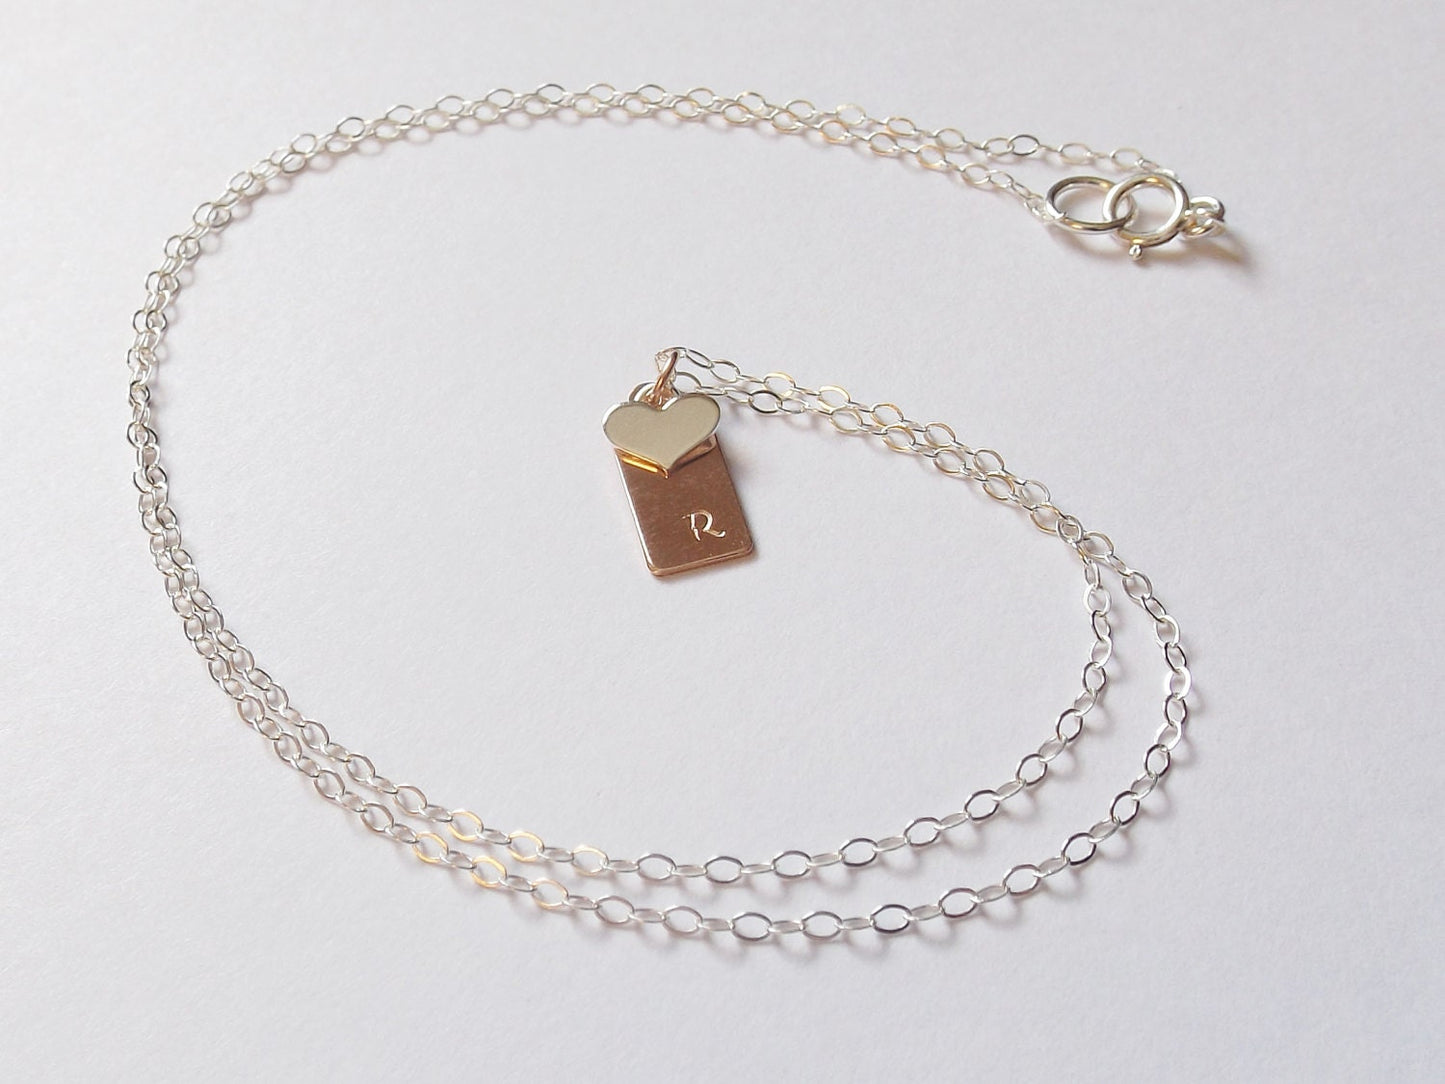 Personalized Bar Necklace,Rose Gold Bar Necklace,Minimalist Bar Necklace,Dainty Necklace,Heart,Rose Gold Necklace,Bar Jewelry,Gift